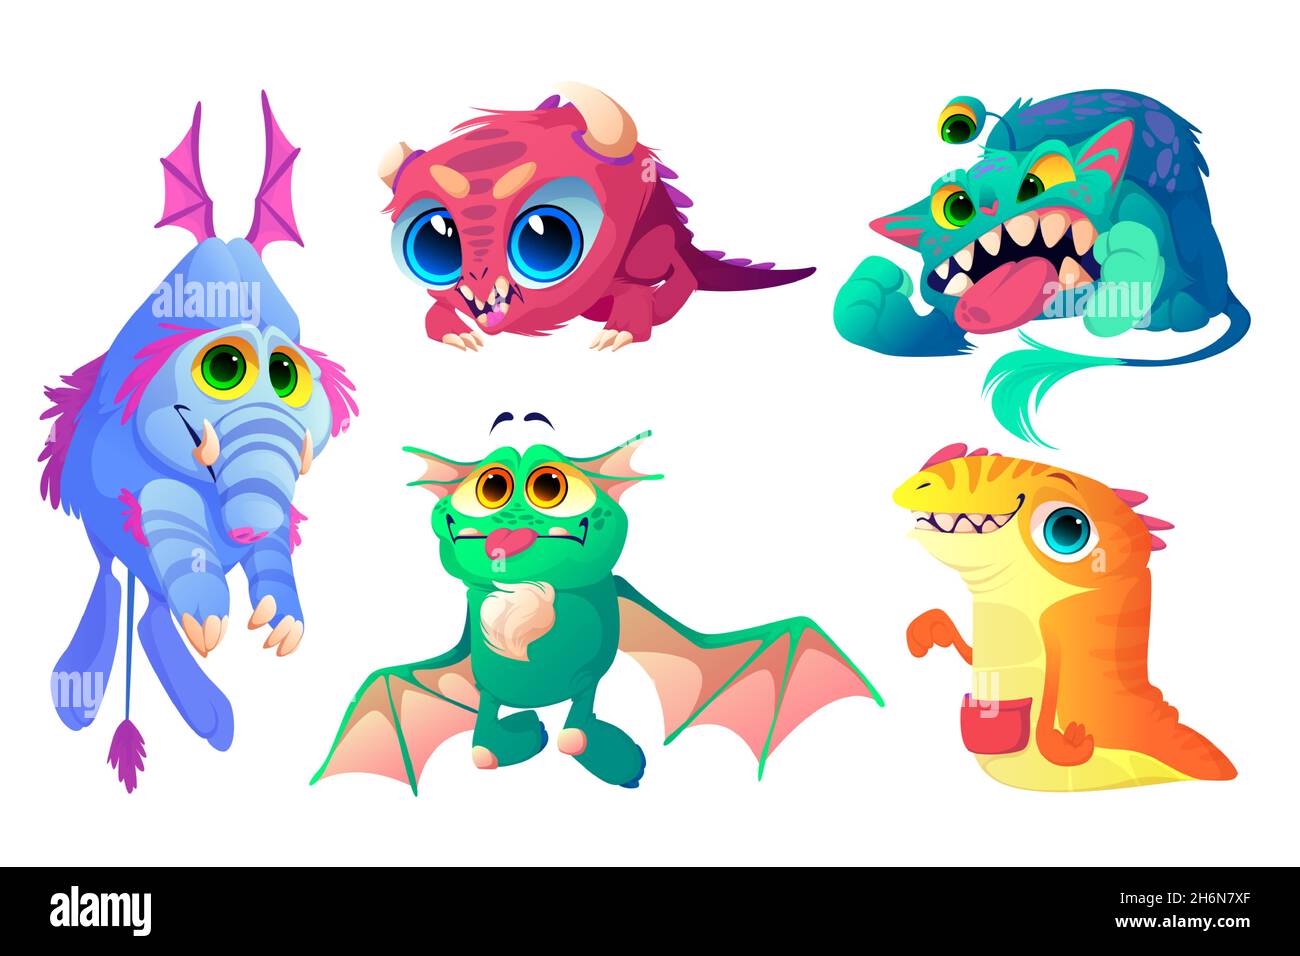 Monsters set, cute cartoon characters, funny aliens, strange animals or Halloween creatures with smiling toothed muzzles, dragon wings, trunk and big eyes. Whimsical spooky mascots Vector illustration Stock Vector